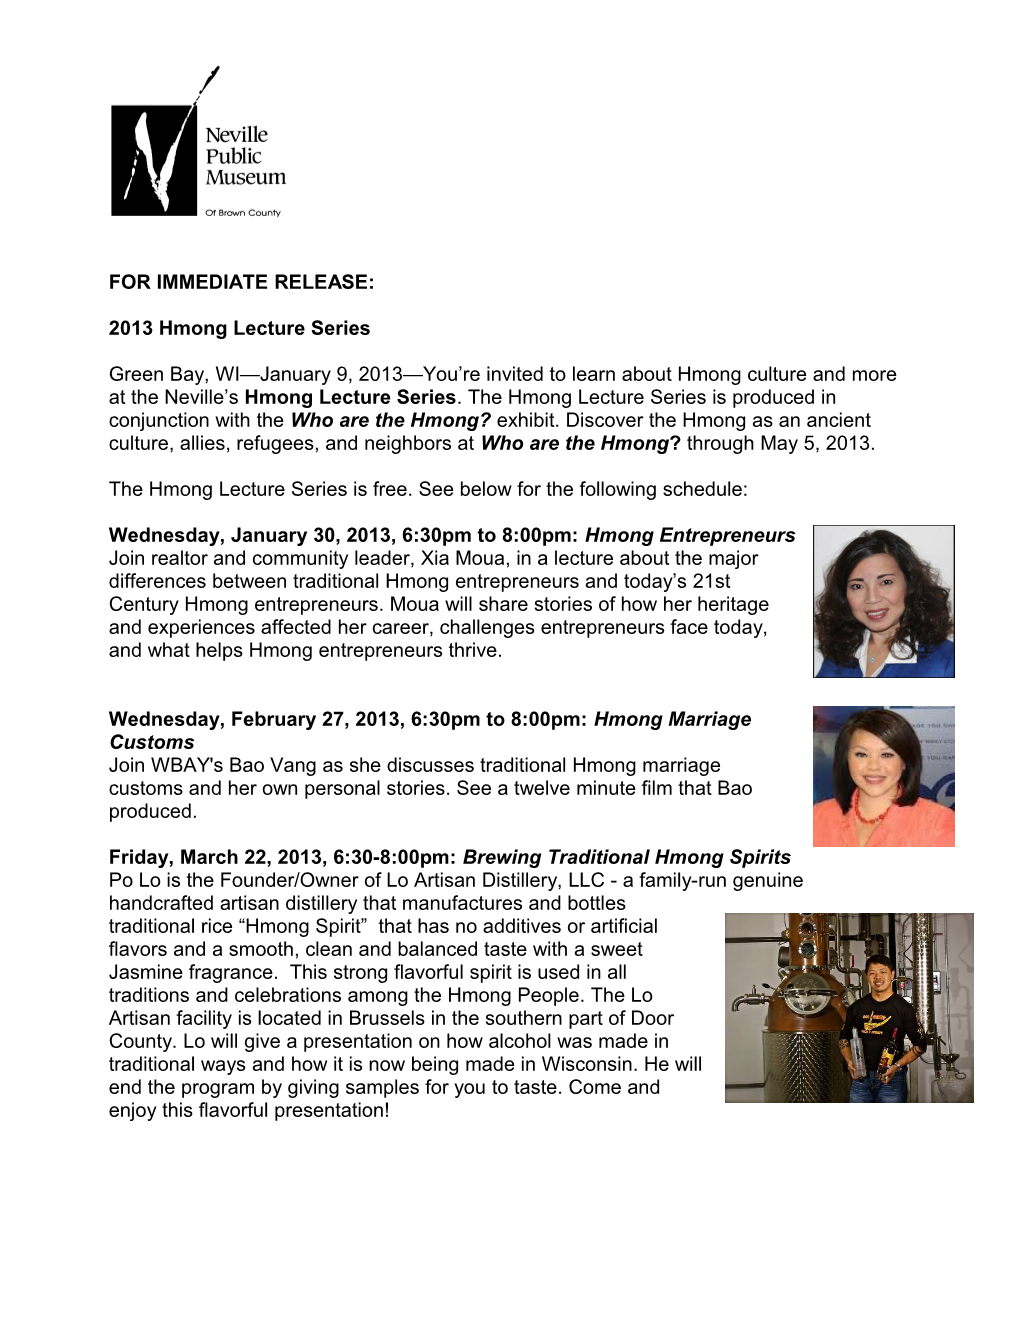 2013 Hmong Lecture Series